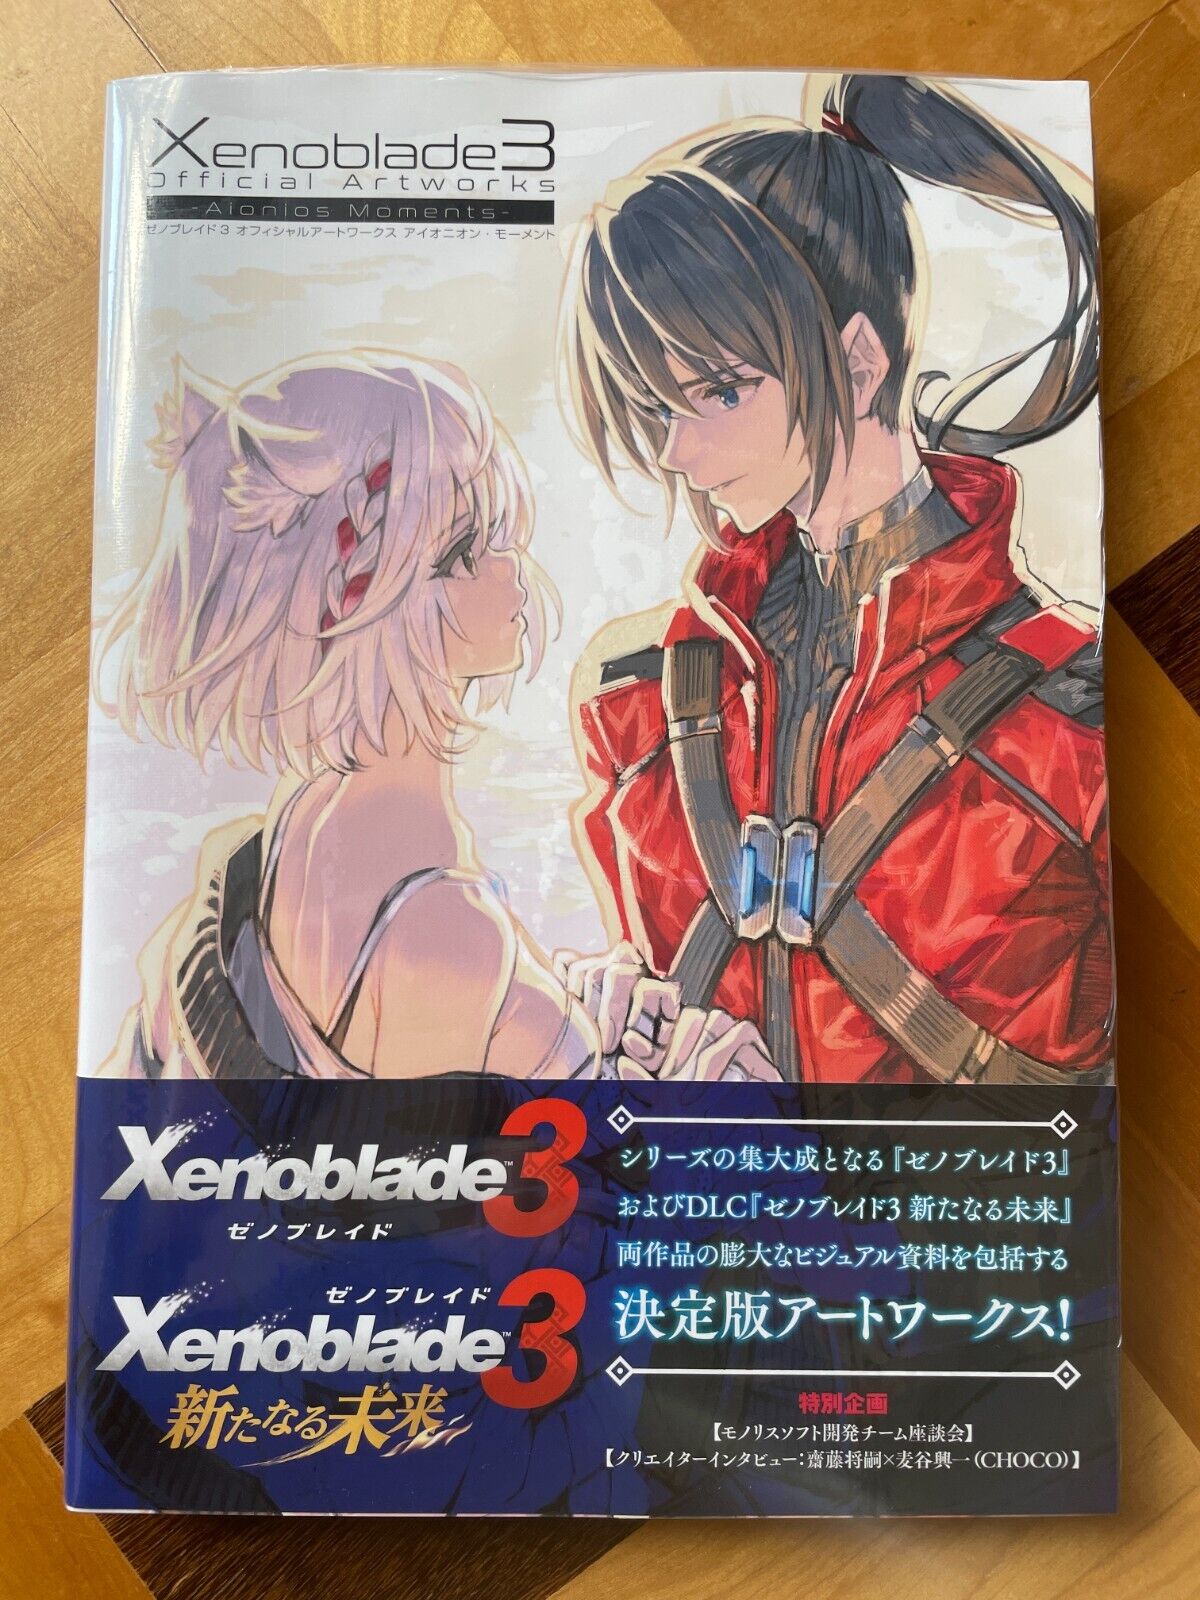 New Xenoblade 3 OFFICIAL ART WORKS Aionions Moments Game Illustration book 2024